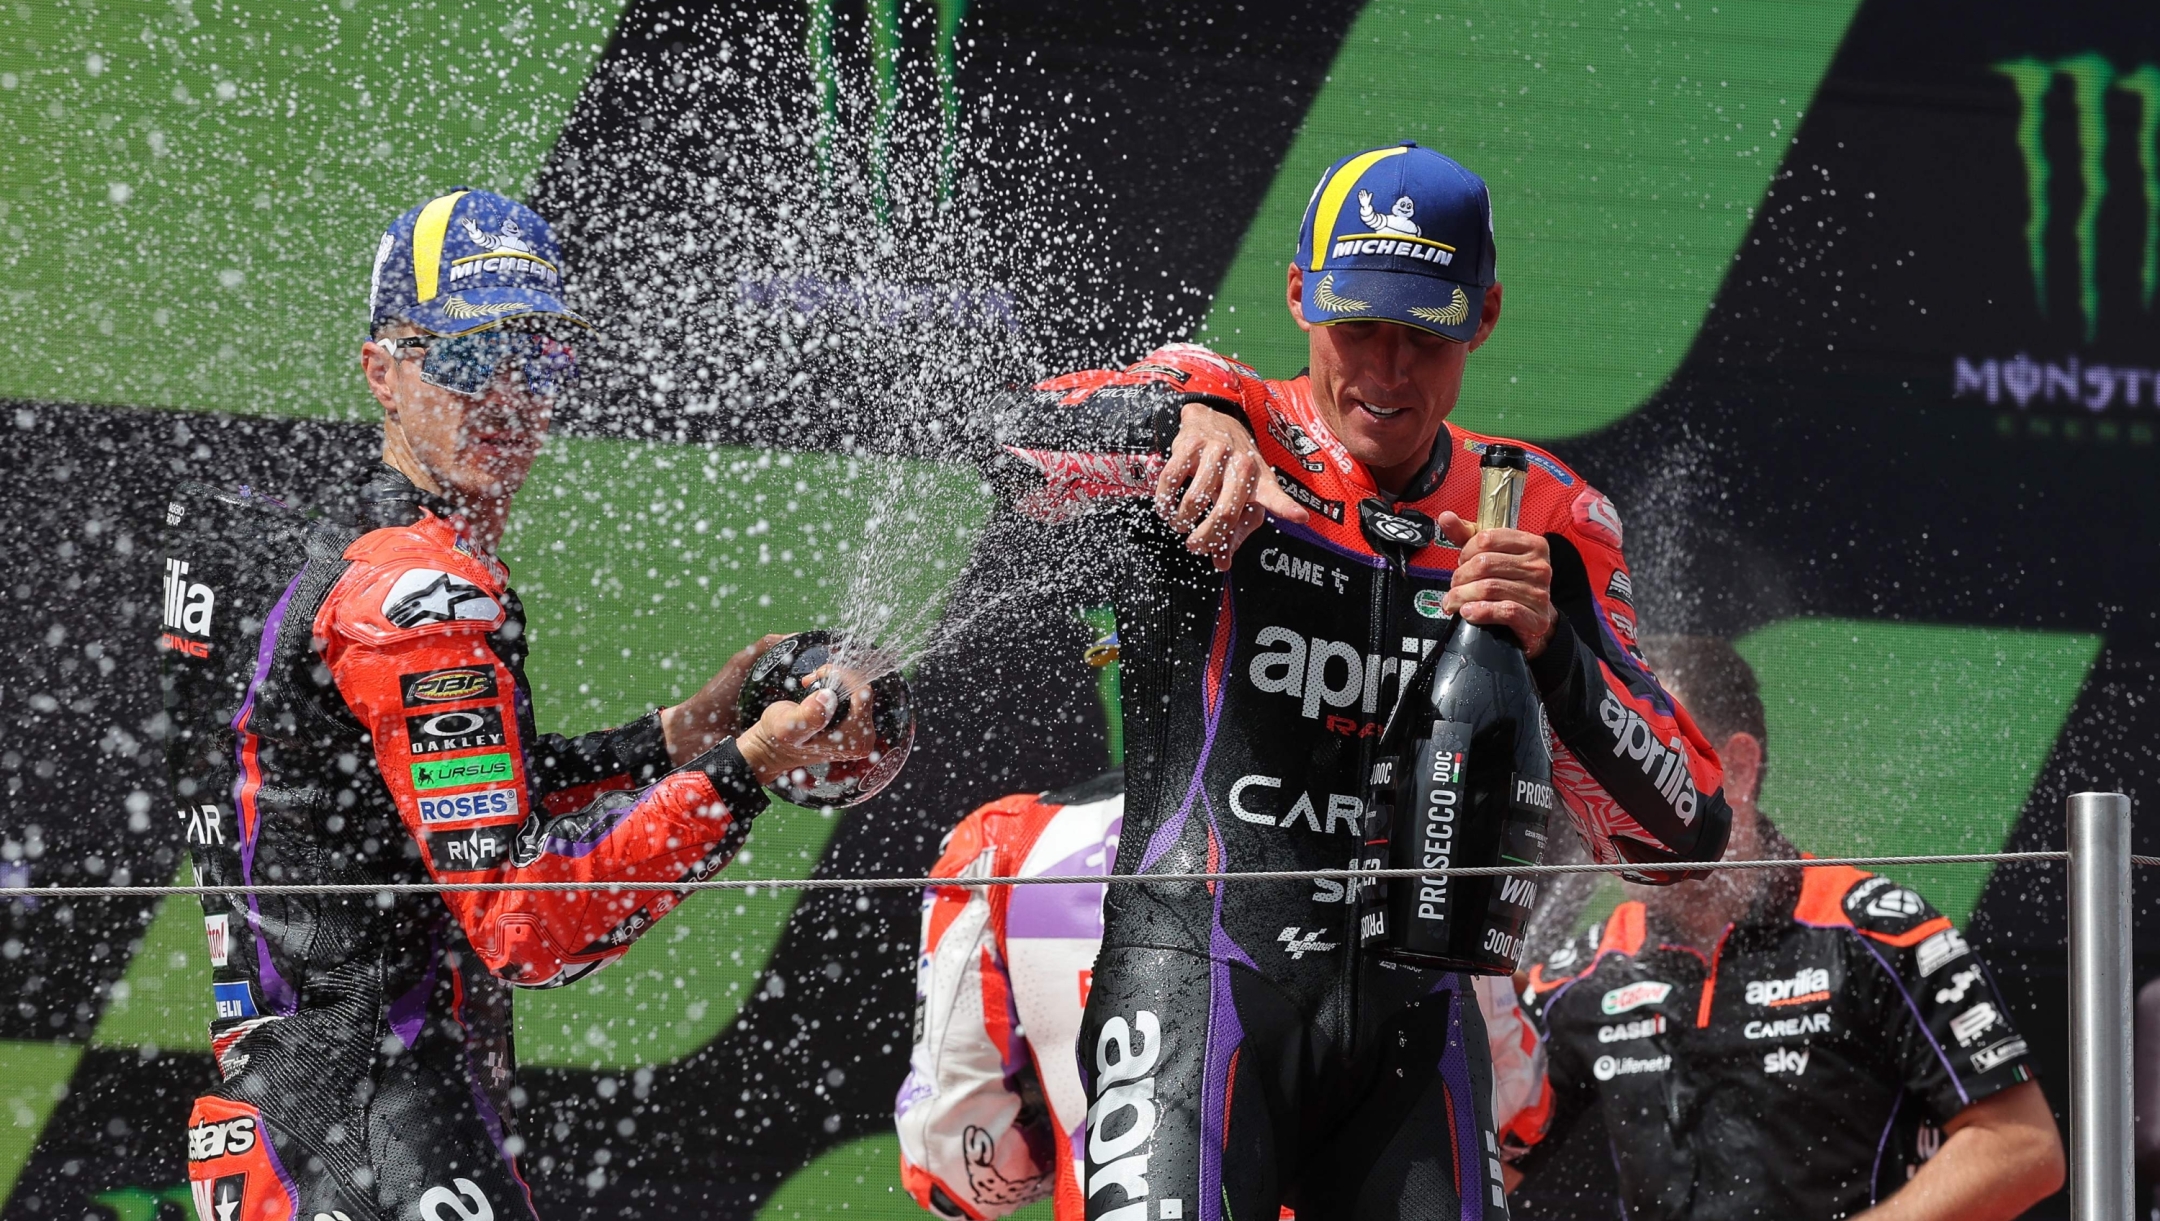 Aprilia Spanish rider Aleix Espargaro (R) celebrates on the podium with Aprilia Spanish rider Maverick Vinales after winning the MotoGP race of the Moto Grand Prix de Catalunya at the Circuit de Catalunya in Montmelo, on the outskirts of Barcelona, on September 3, 2023. (Photo by LLUIS GENE / AFP)